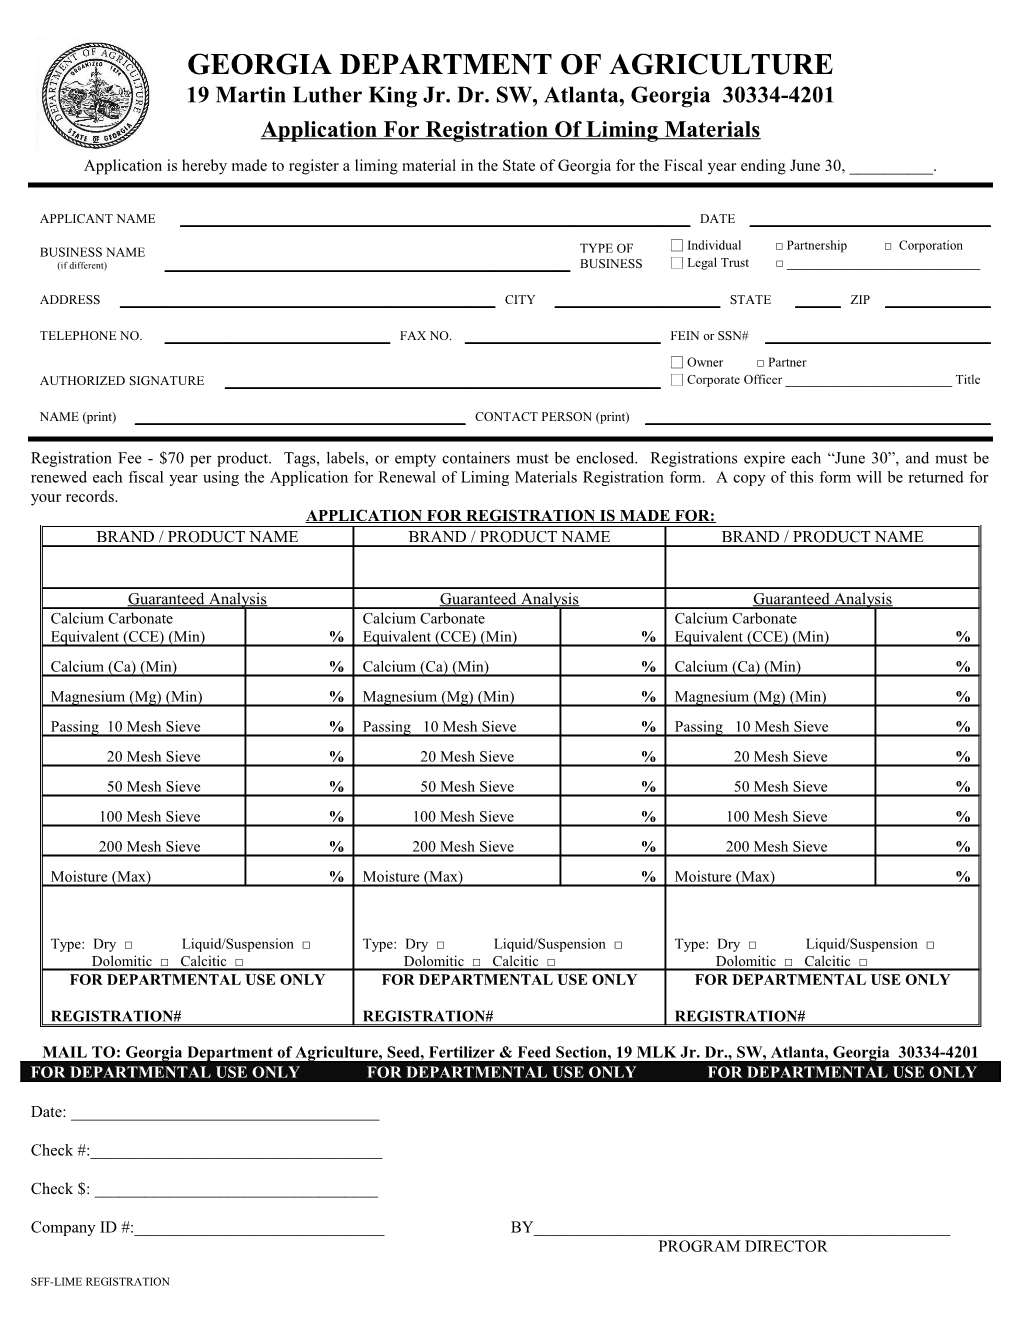 Application for Registration of Liming Materials